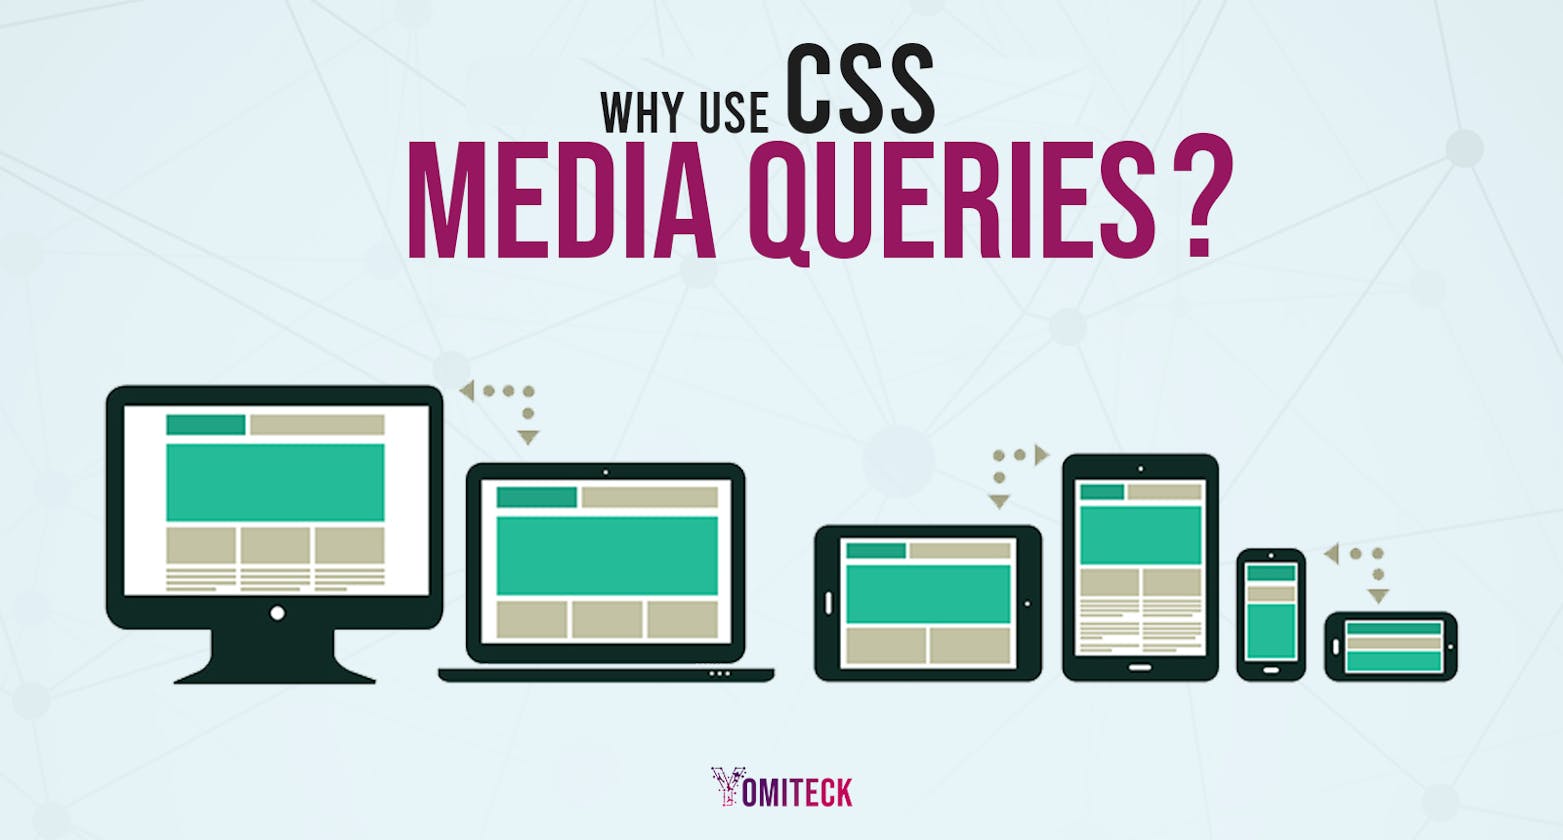 Why use CSS Media Queries?